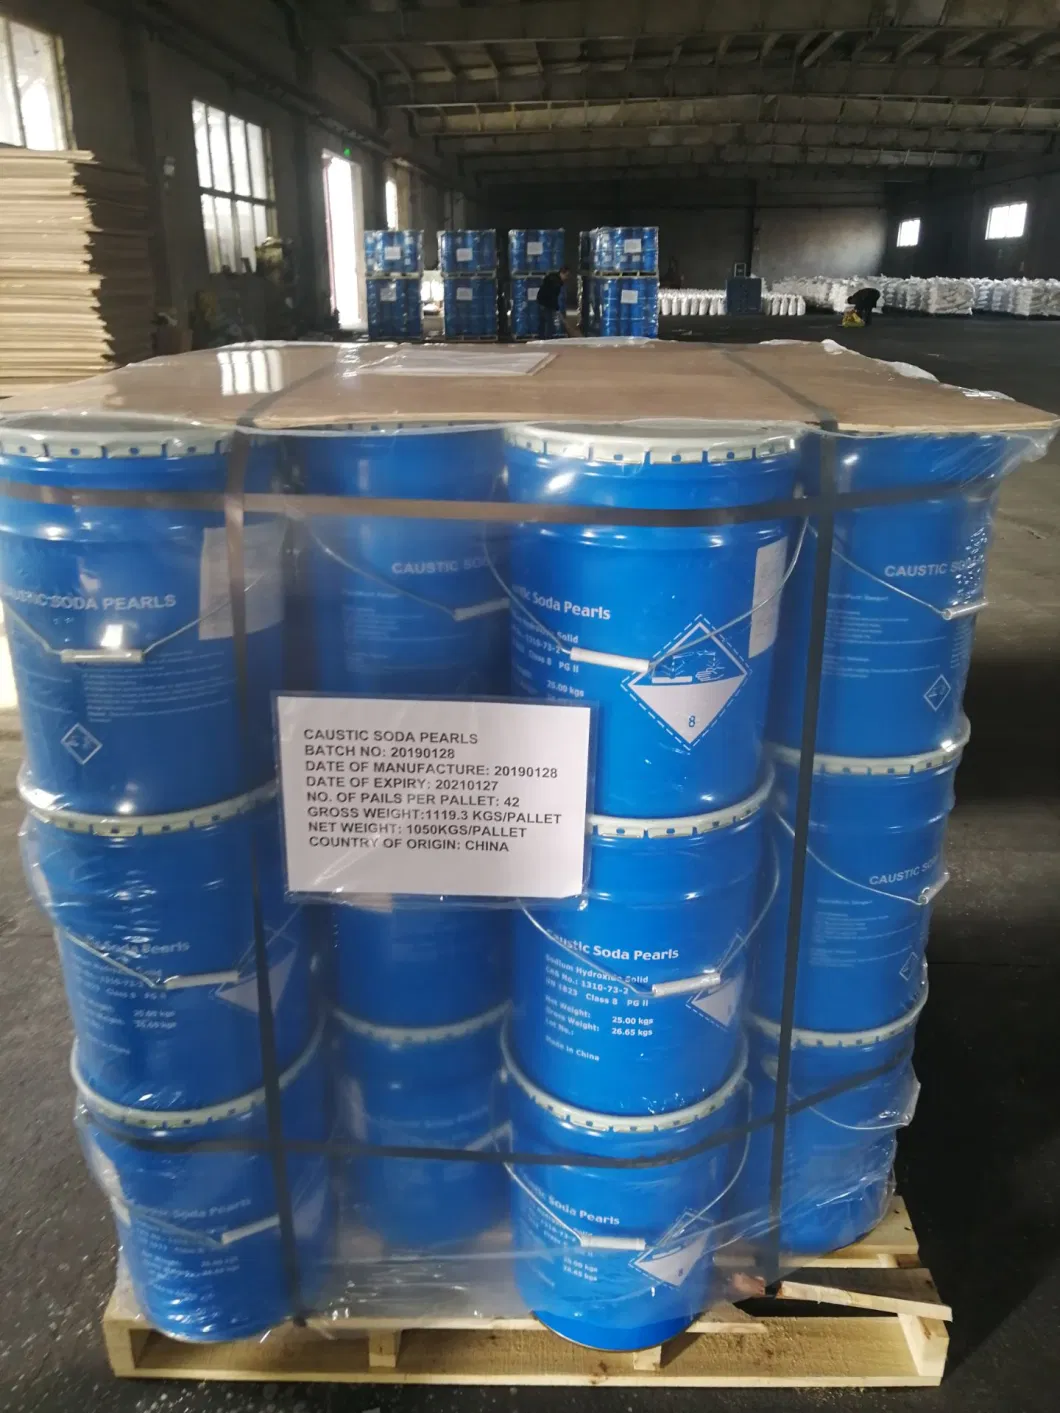 (Used in Soap and Water Treatment Industry) CAS No 1310-73-2 (CSP Pearls) Caustic Soda